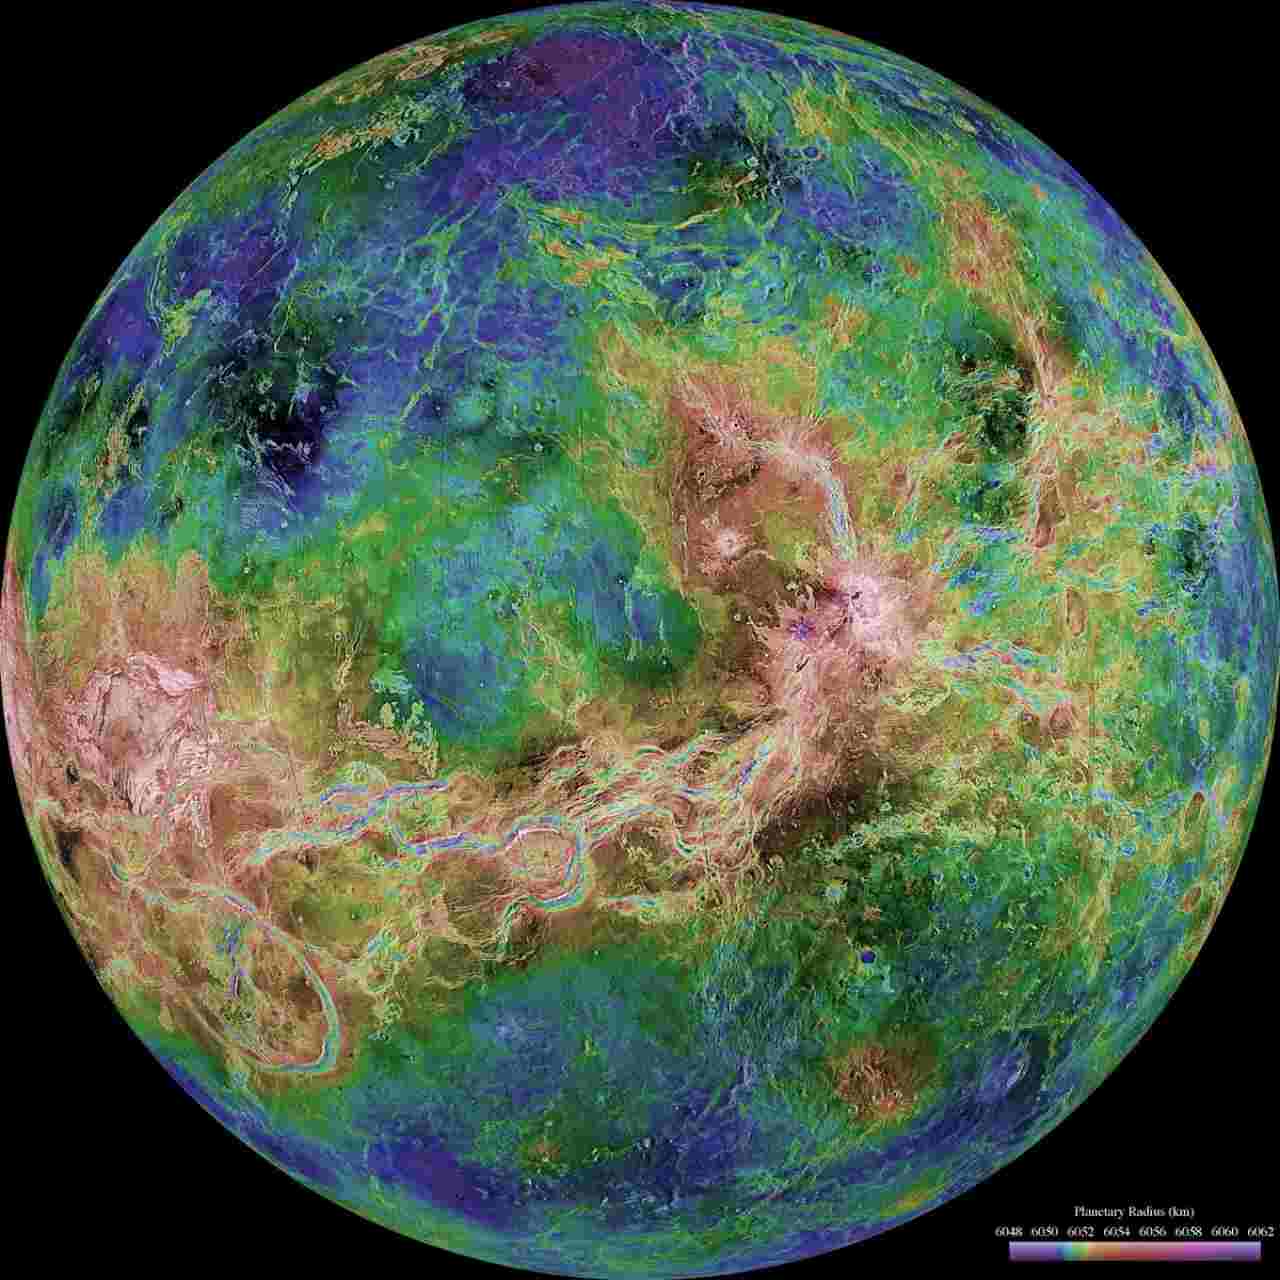 A hemispheric view of Venus – product of over a decade of radar investigations in the 1990-1994 Magellan mission – published on 4 June 1998. Image credit: NASA/JPL/USGS via Reuters